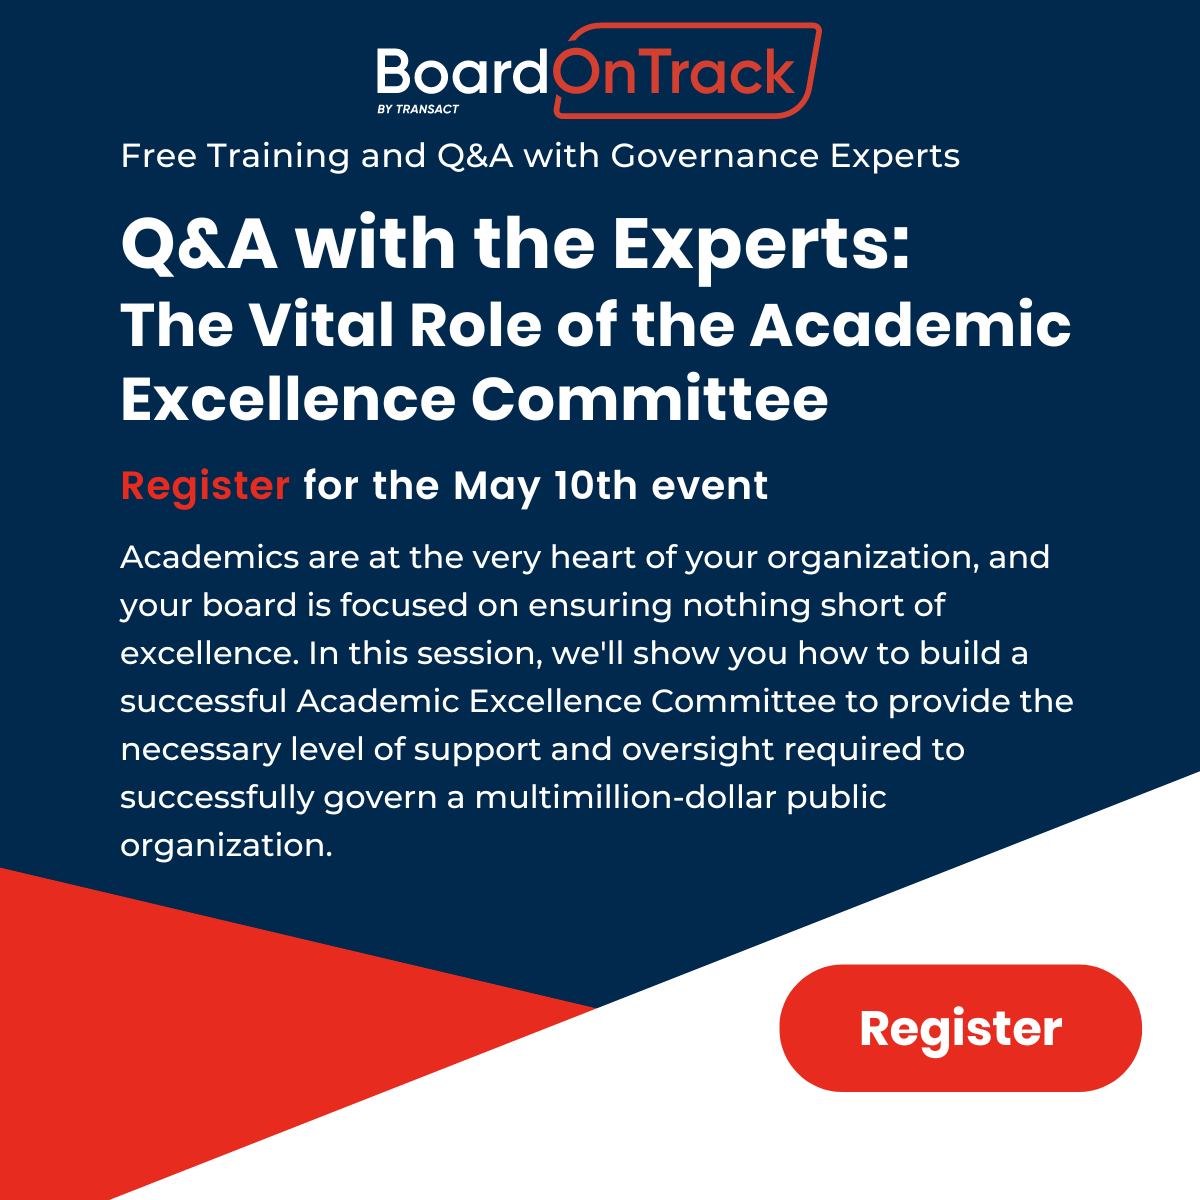 The Vital Role of the Academic Excellence Committee